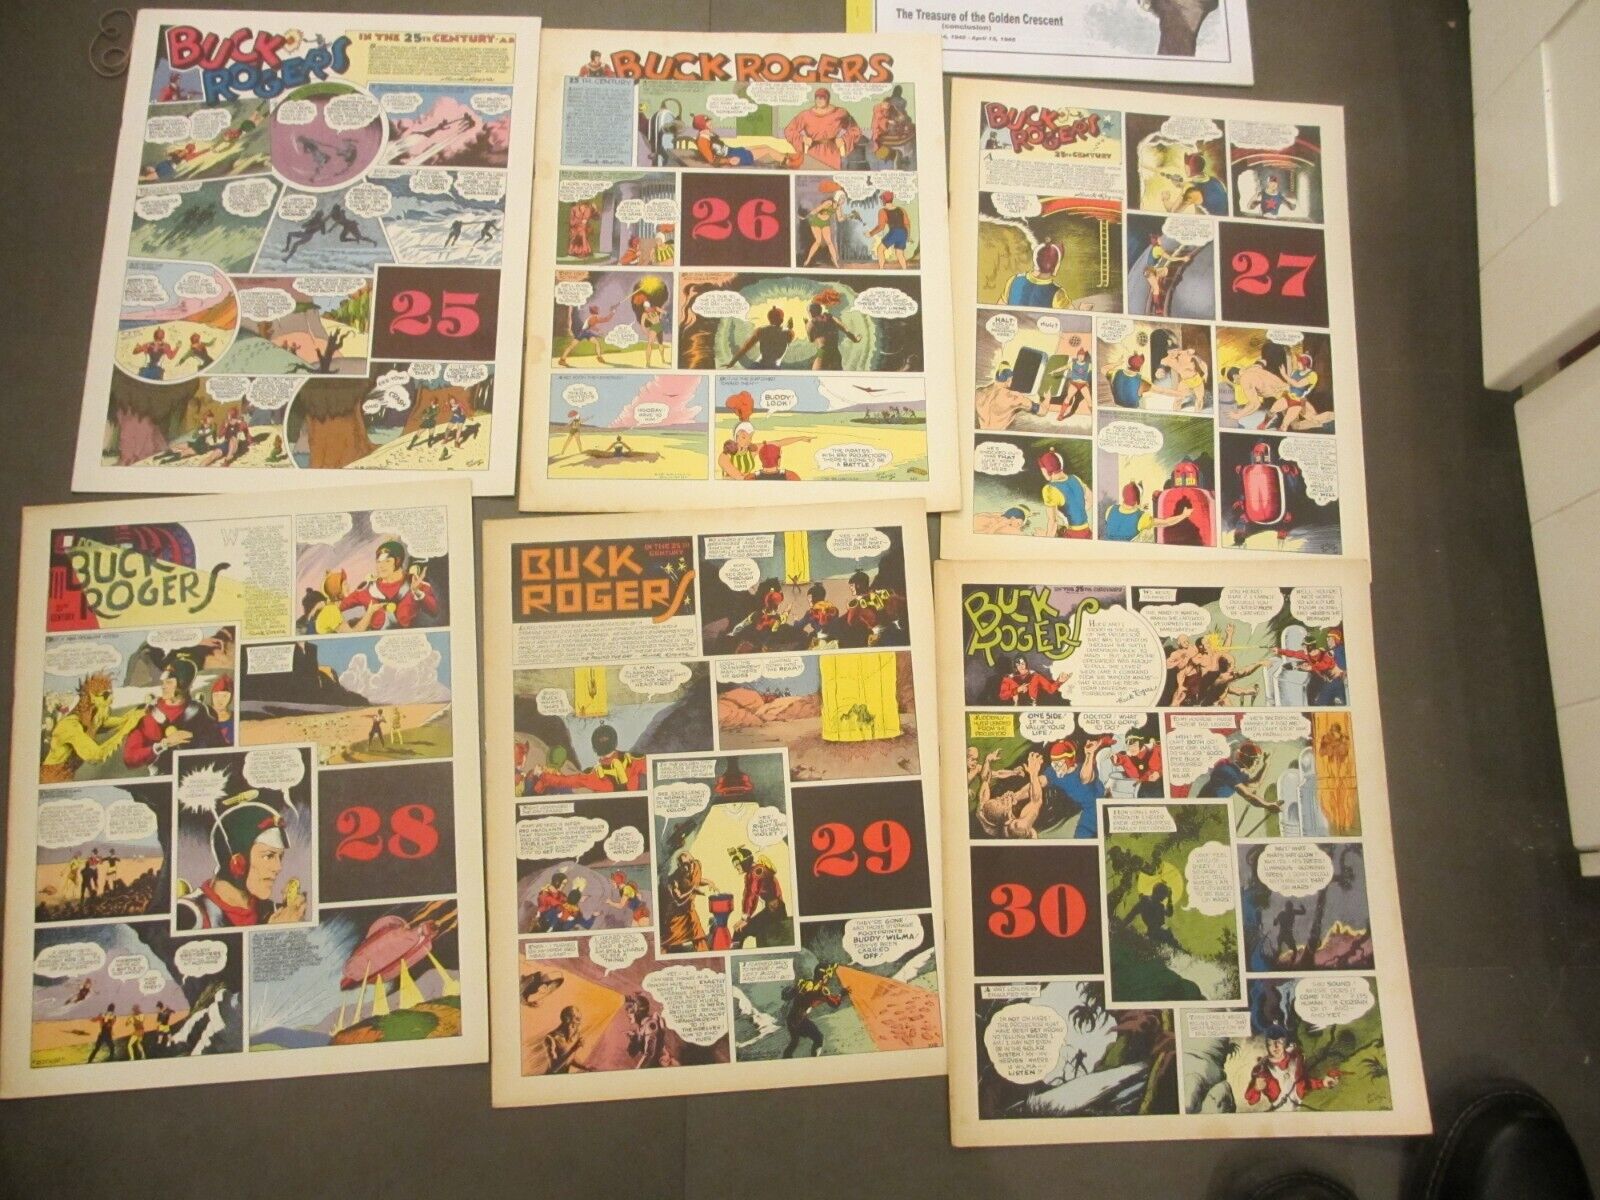 6 BOOKLETS  THE SUNDAY BUCK ROGERS -REPRINT OF 1940 COMICS STRIP  volumes 25-30